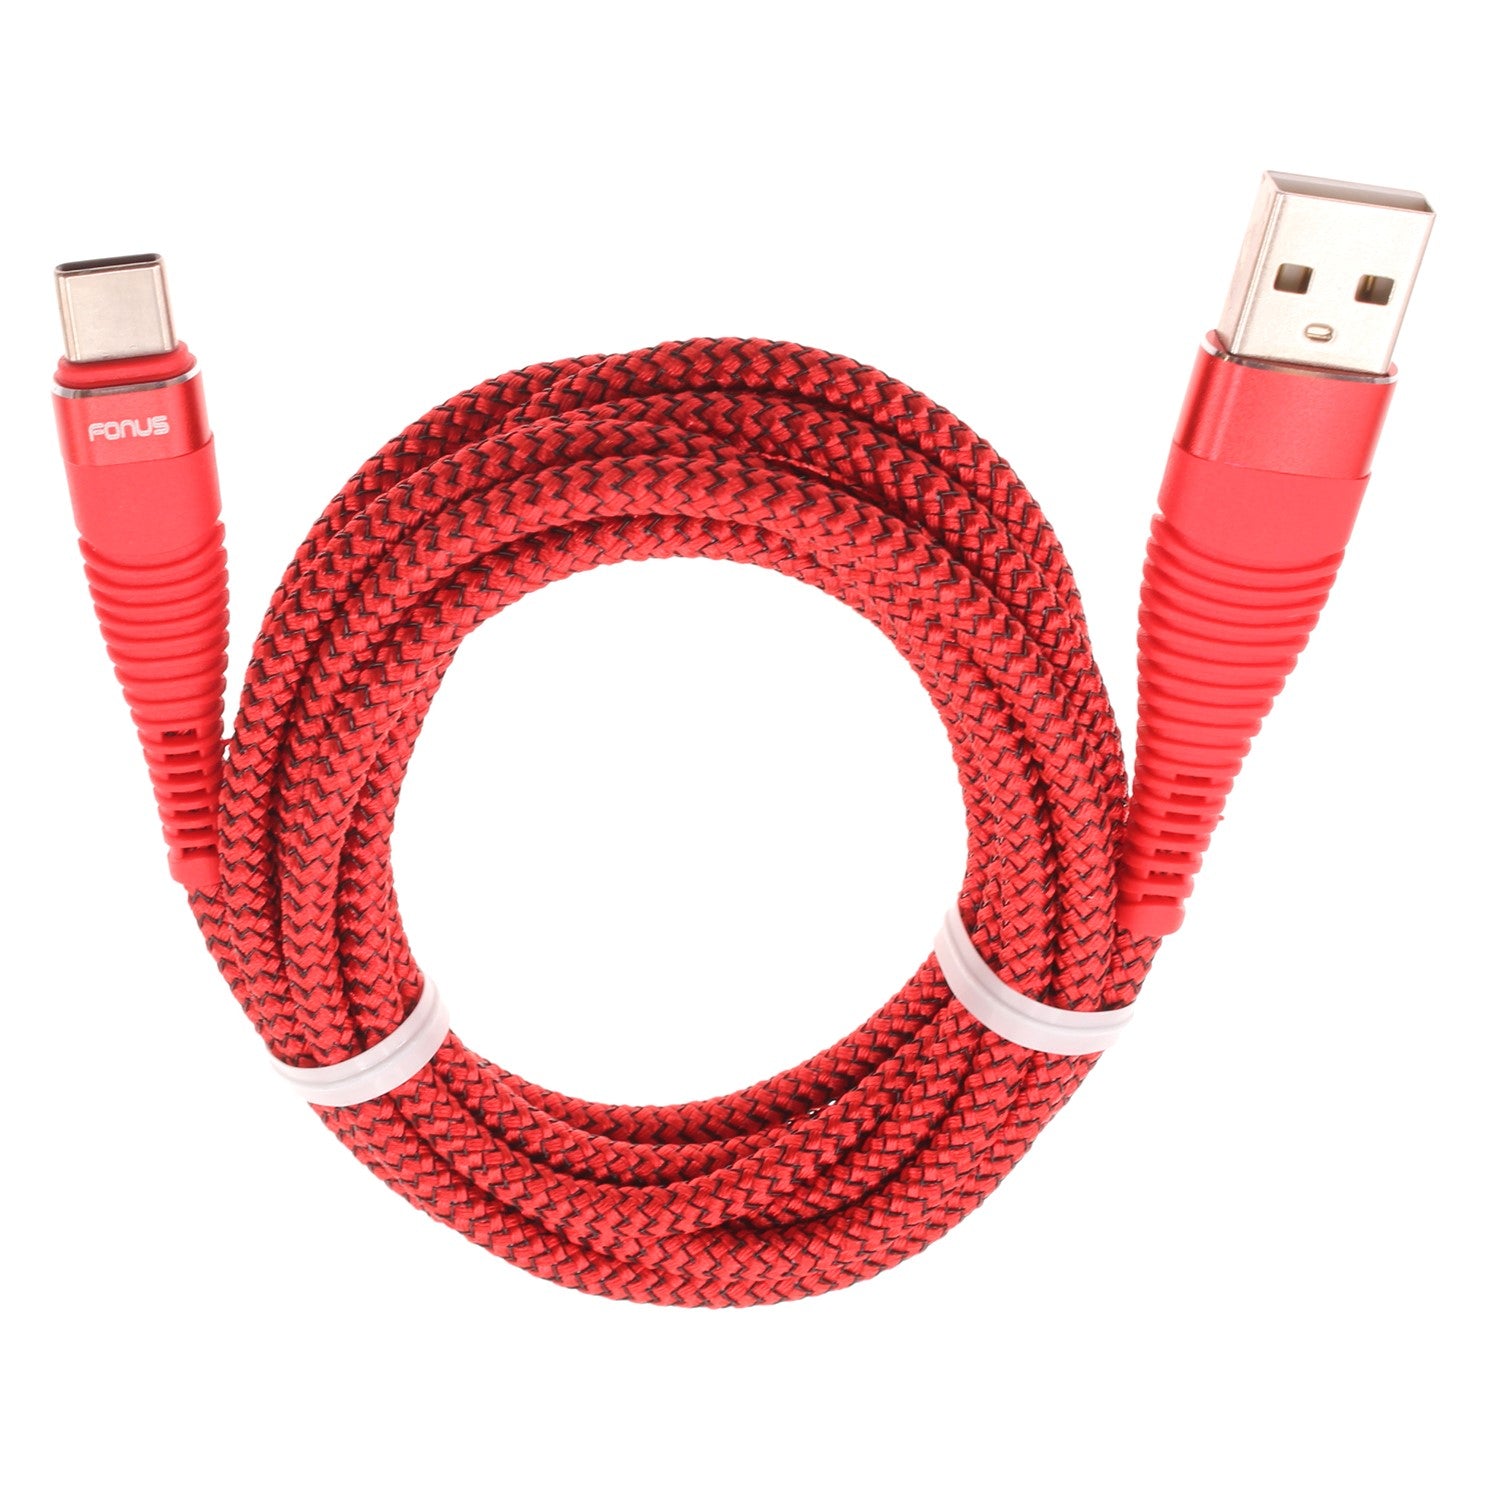  6ft and 10ft Long USB-C Cables ,   Red Braided   Data Sync   Power Wire   TYPE-C Cord   Fast Charge   - NWJ21+J53 1995-2